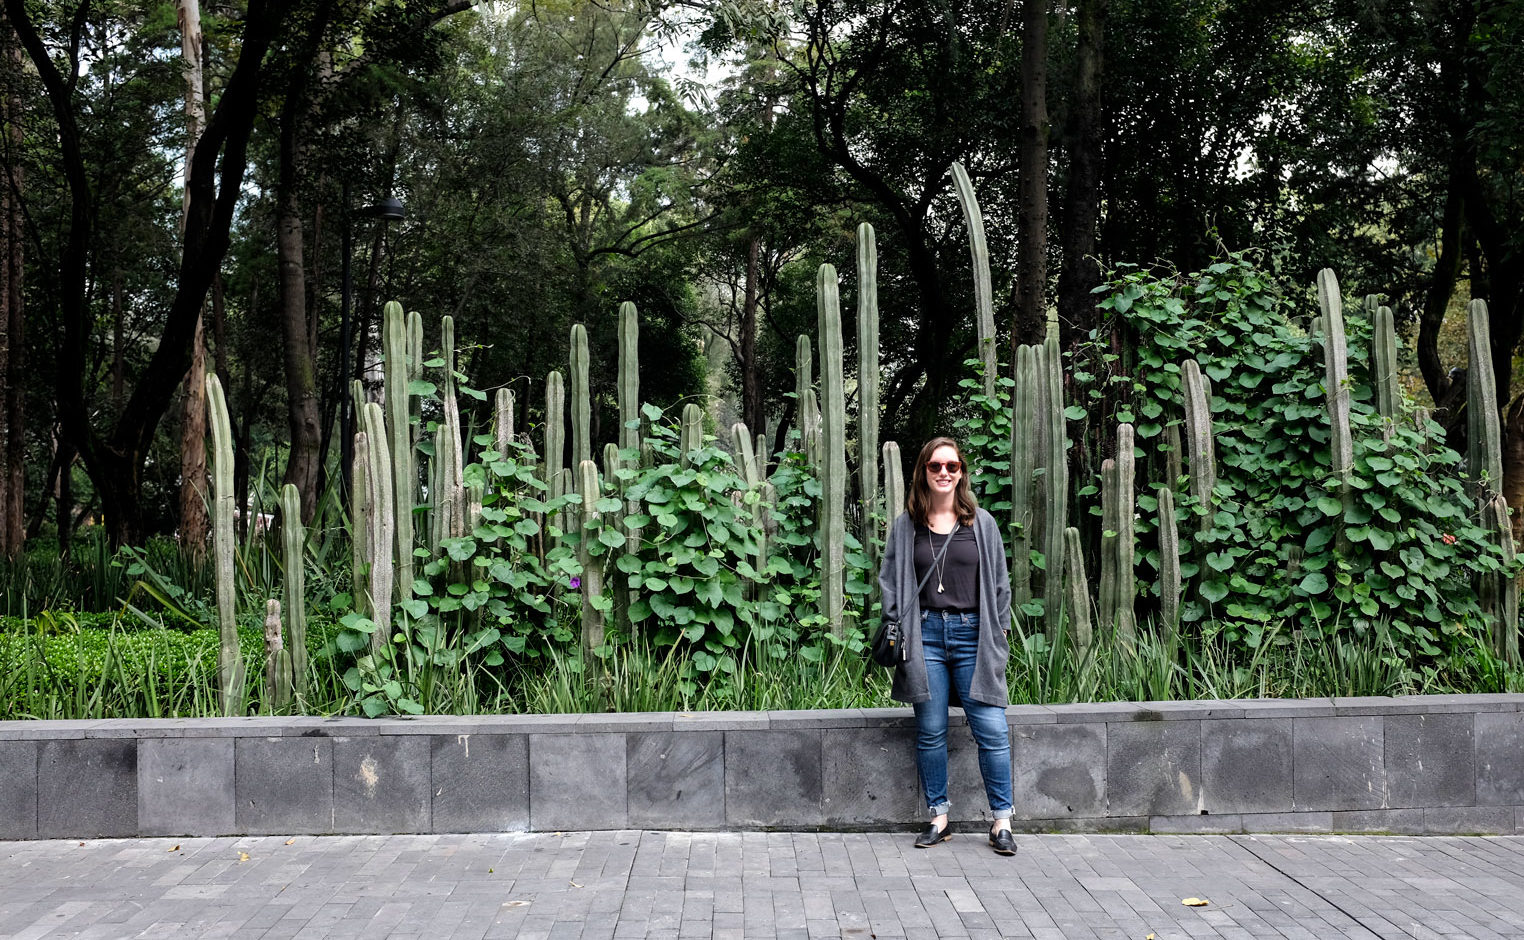 Alyssa stands with a row of cacti in Mexico City